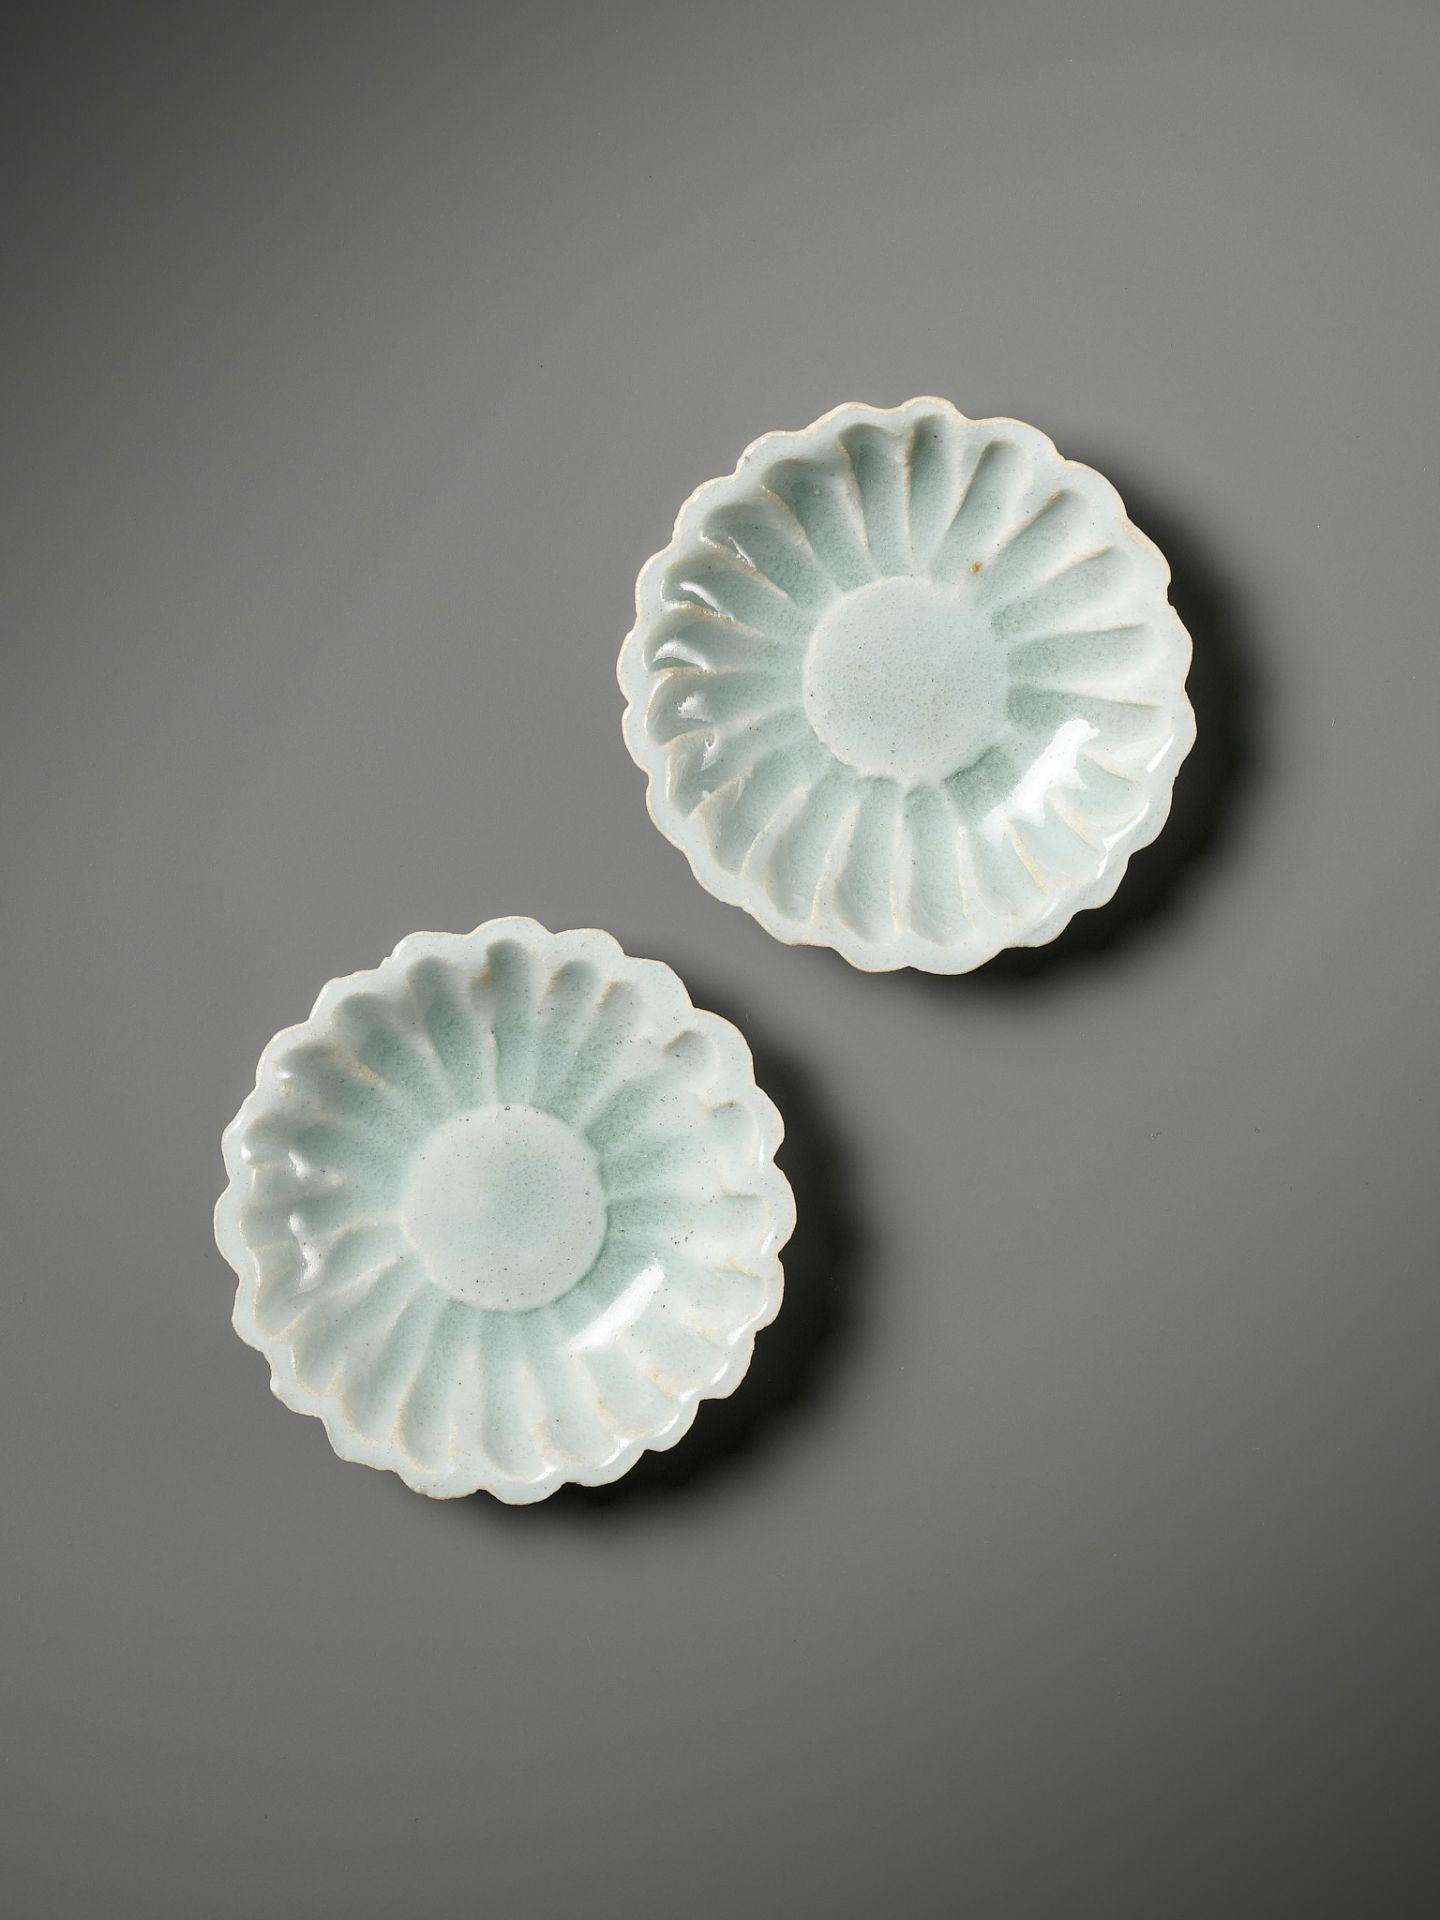 A PAIR OF QINGBAI 'CHRYSANTHEMUM' MINIATURE DISHES, SONG DYNASTY - Image 2 of 7